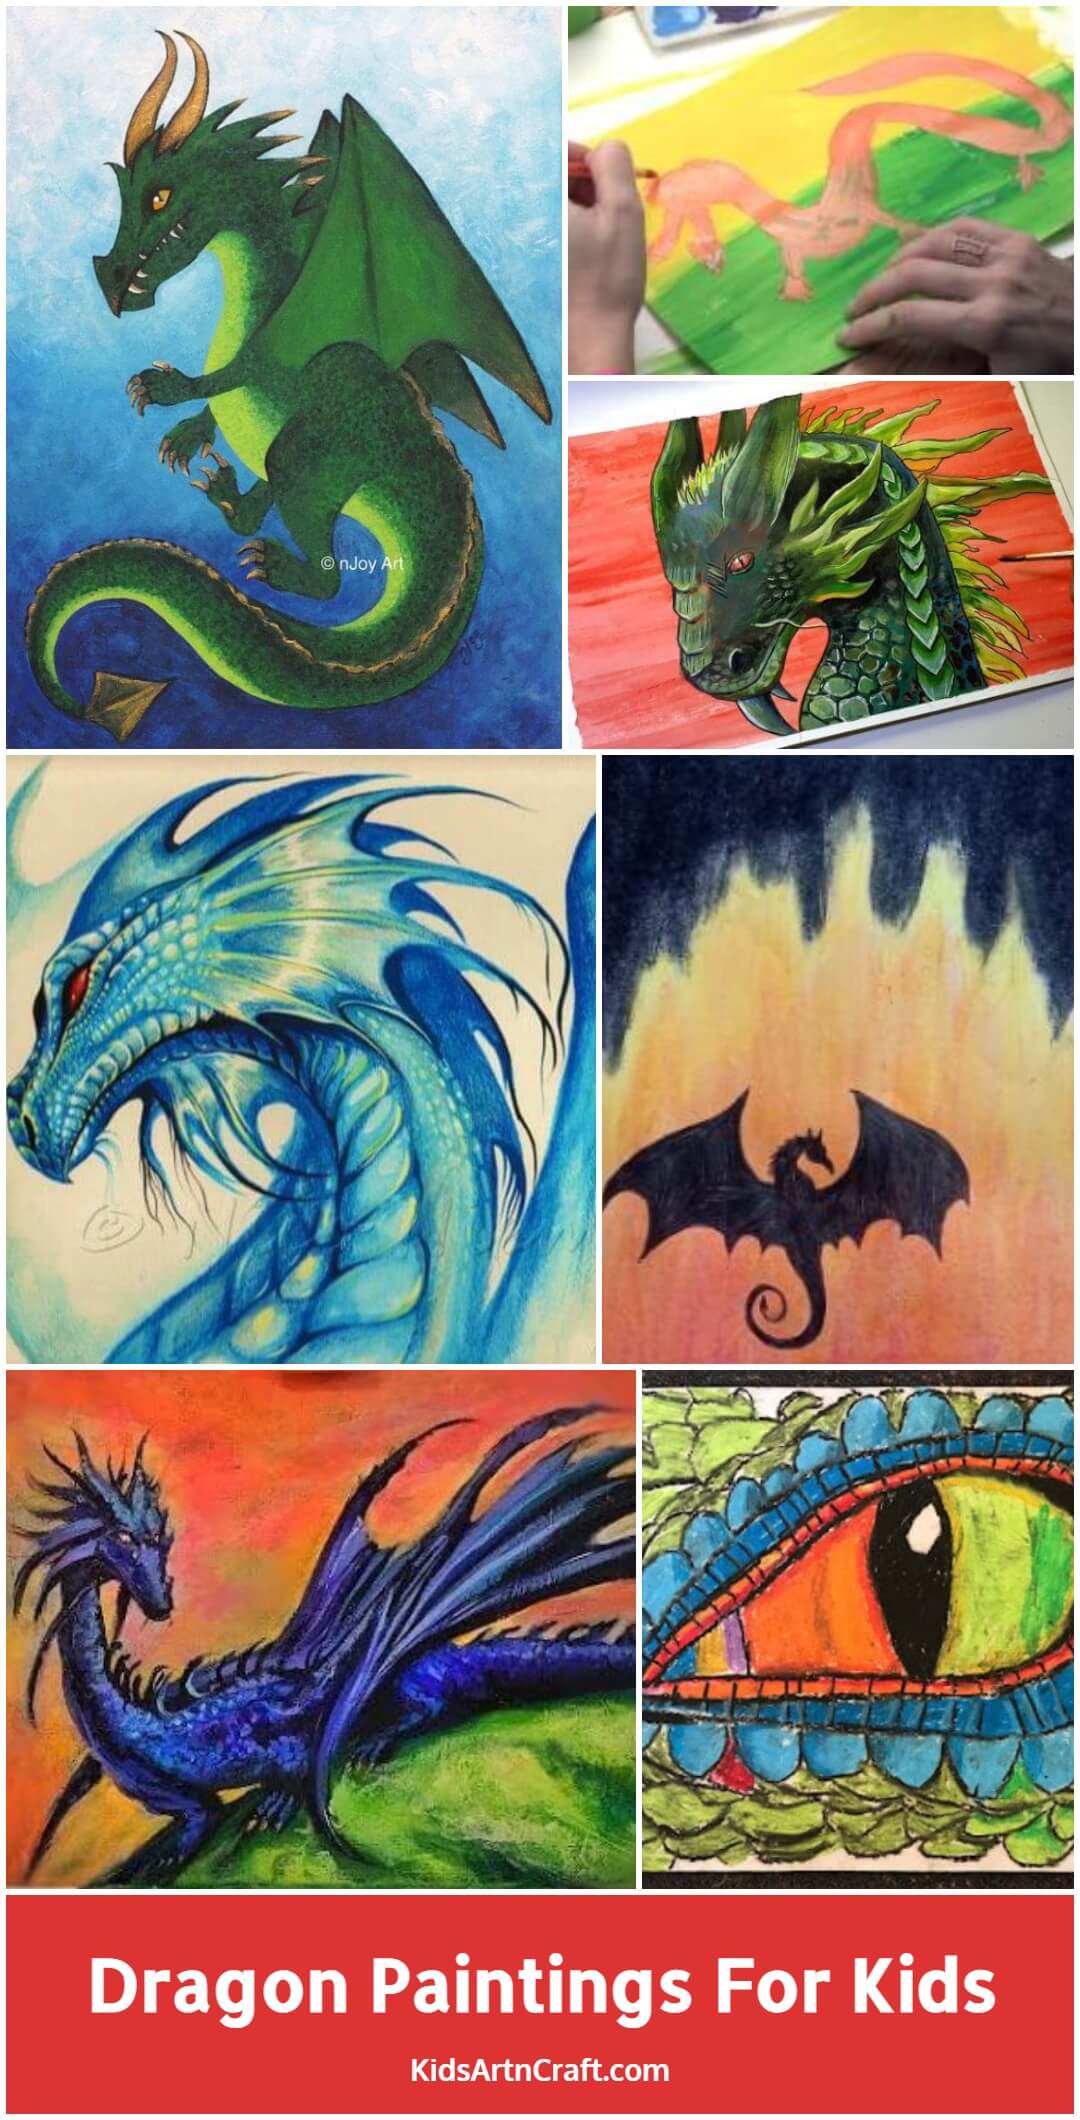 Dragon Paintings for Kids